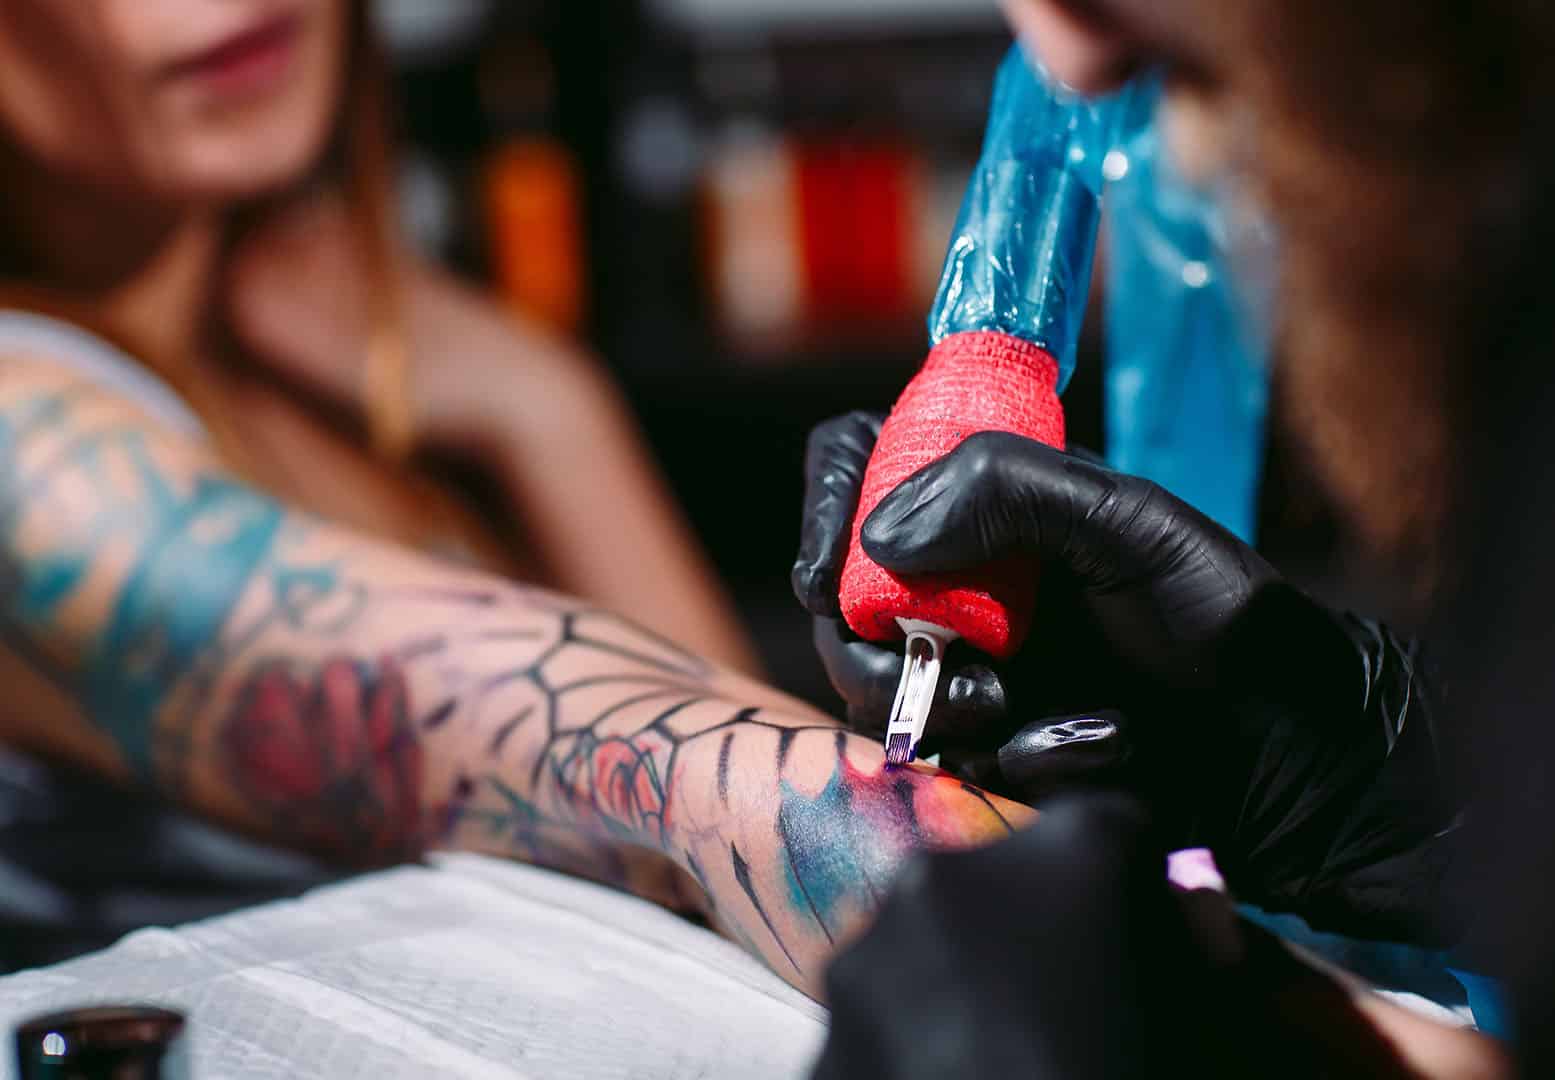 Tattoo Bubbling Causes Treatment and Prevention